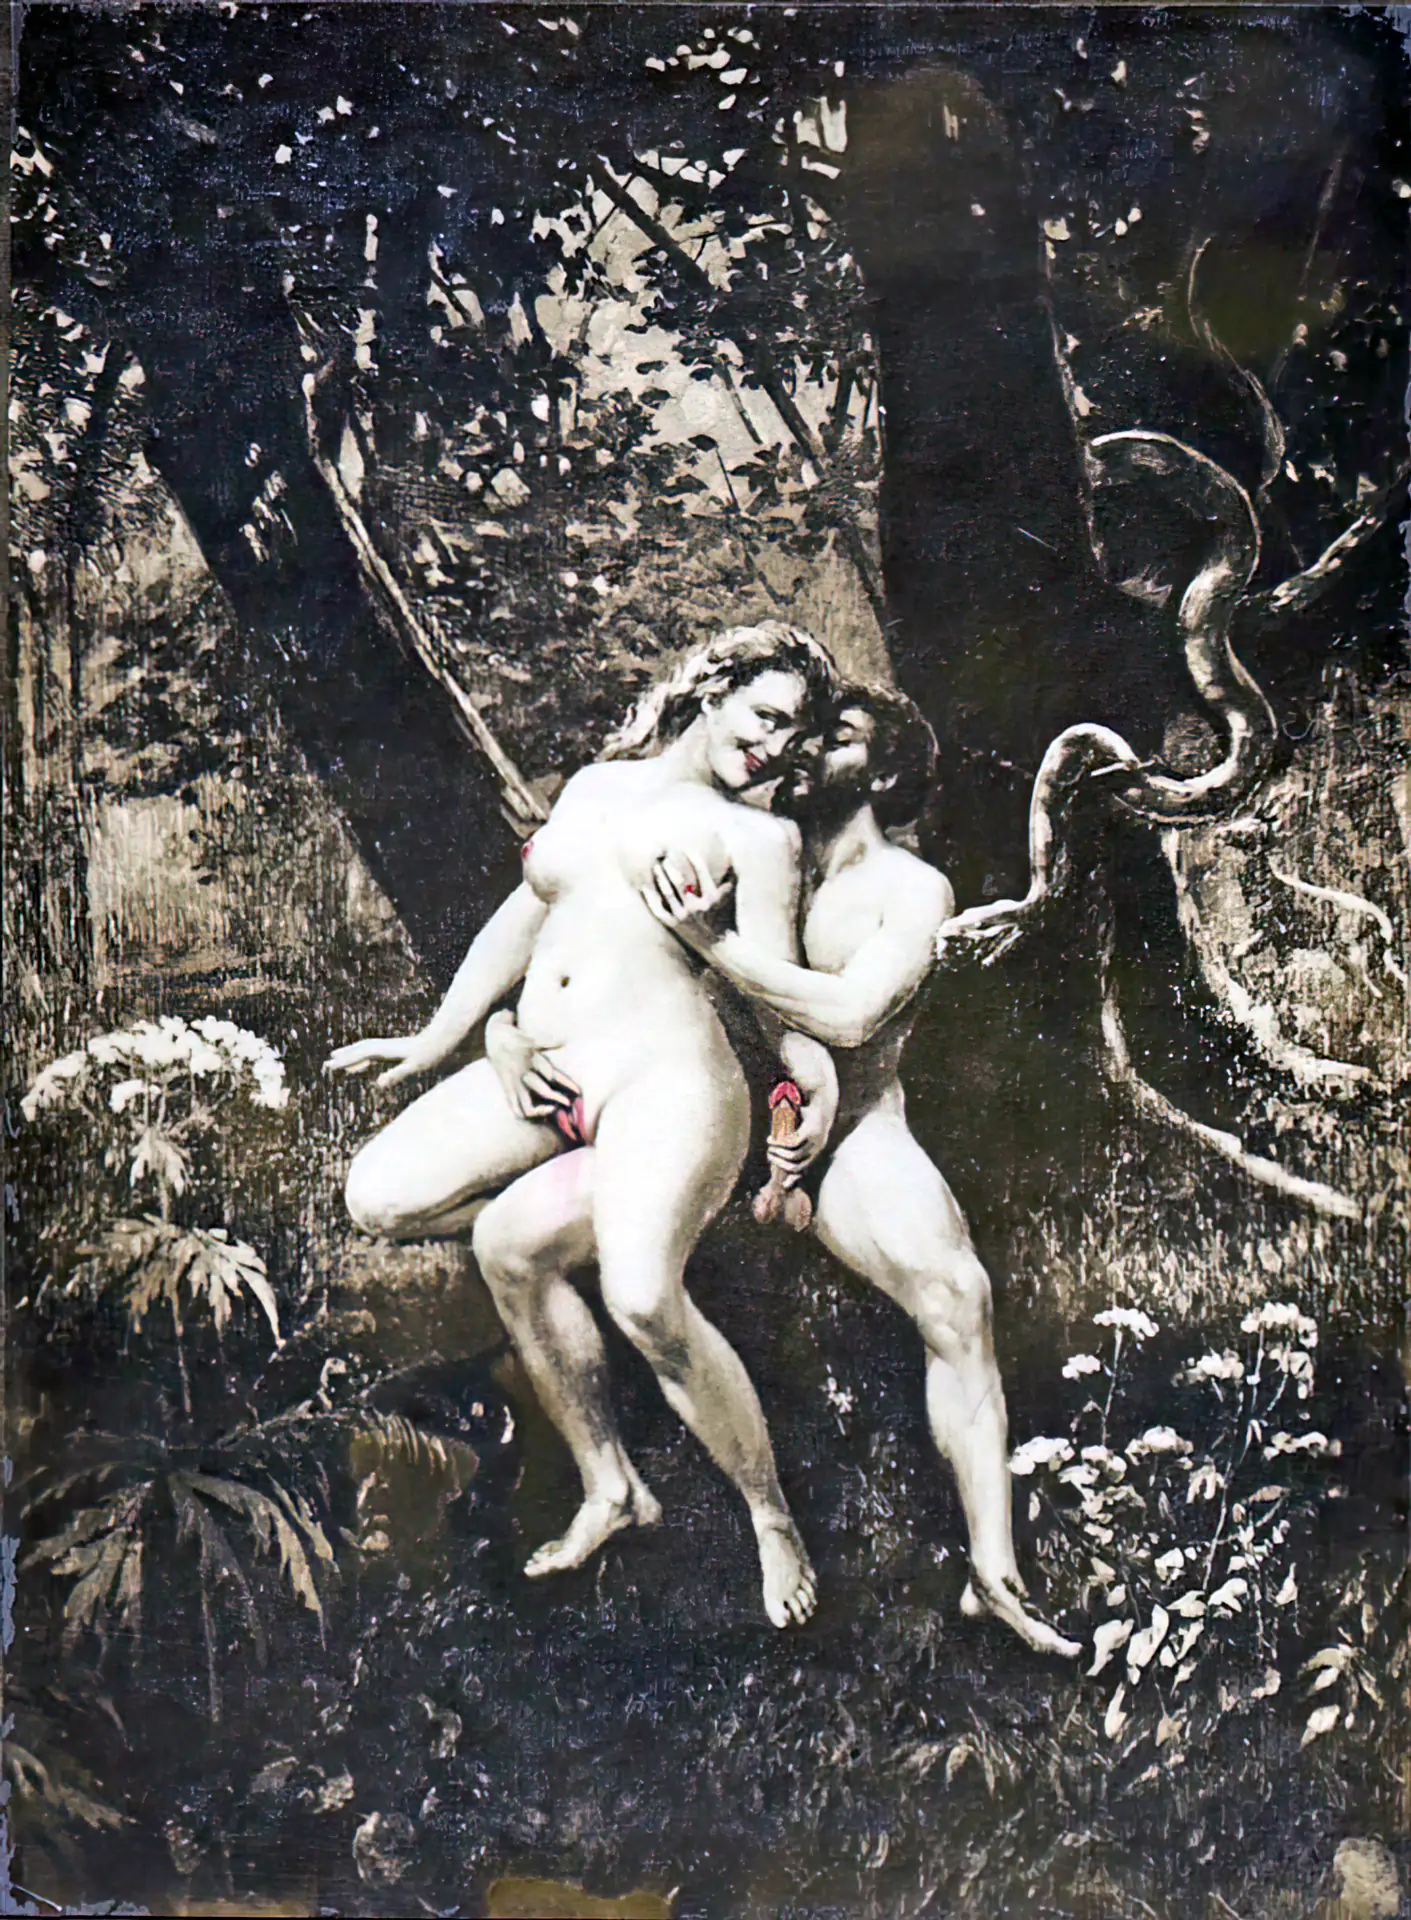 Classic Adam and Eve touch each other's bodies in front of the snake